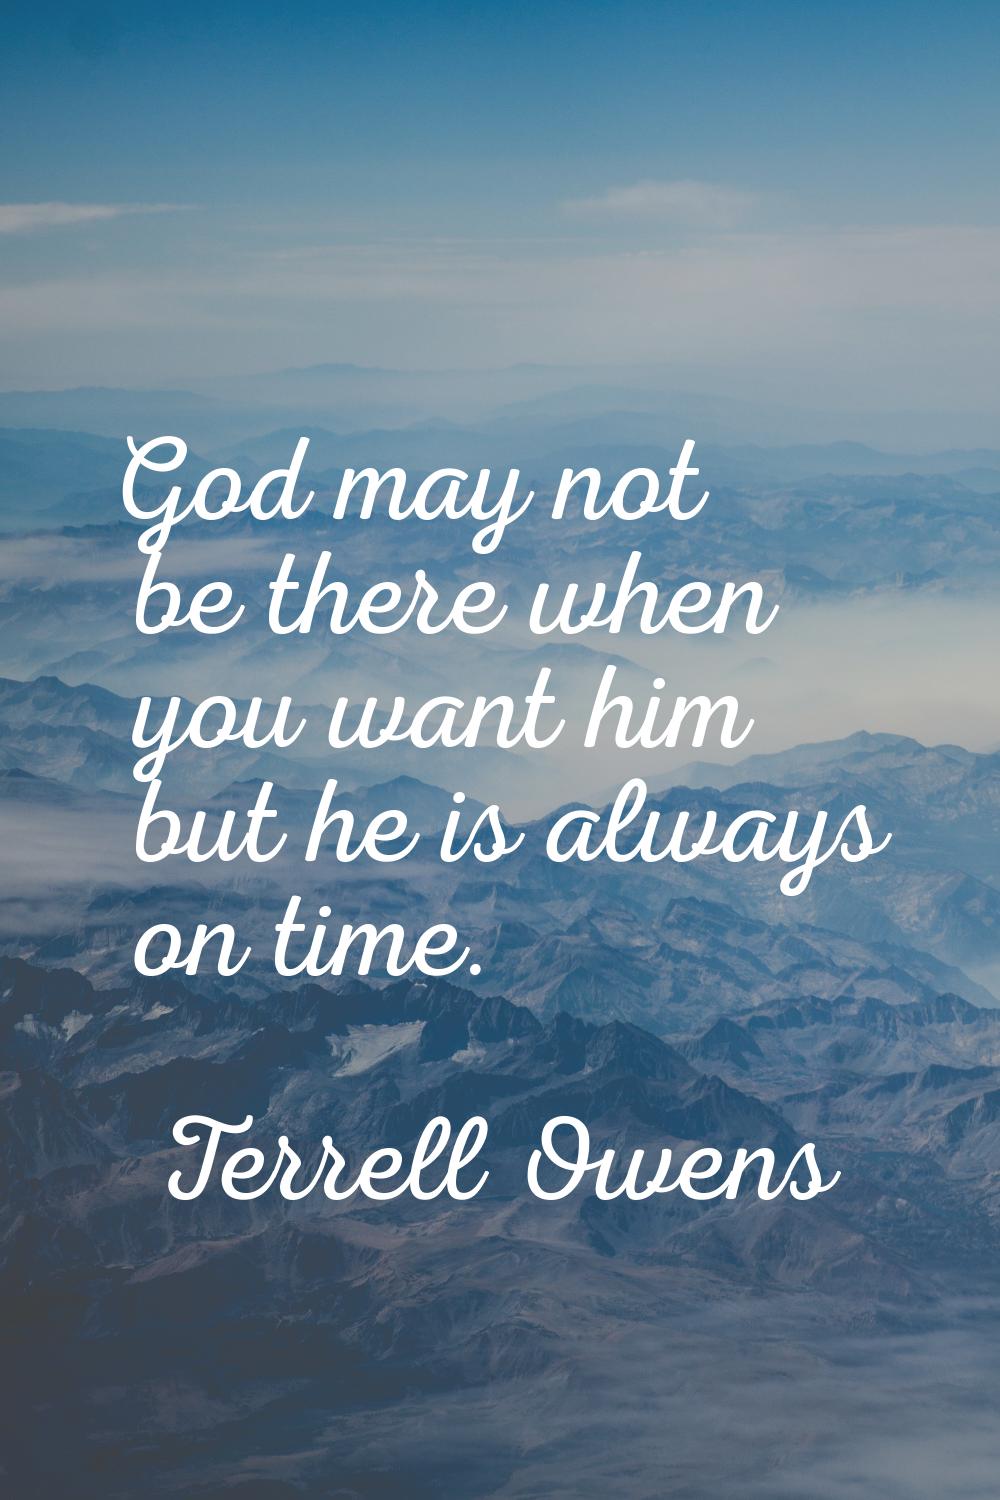 God may not be there when you want him but he is always on time.